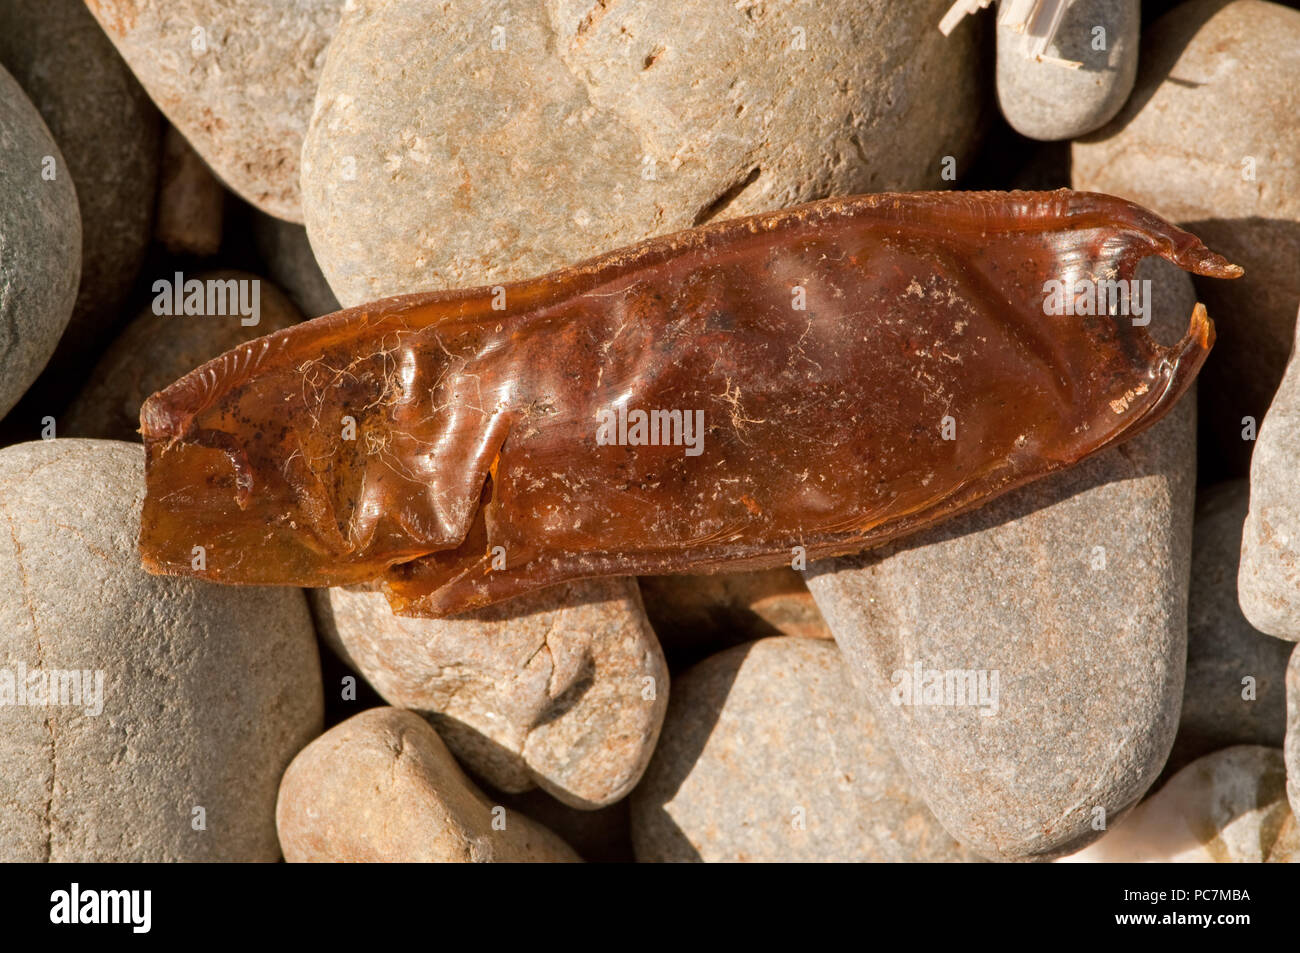 Smallspotted Catshark or Lesser Spotted Dogfish mermaid's purse Stock Photo